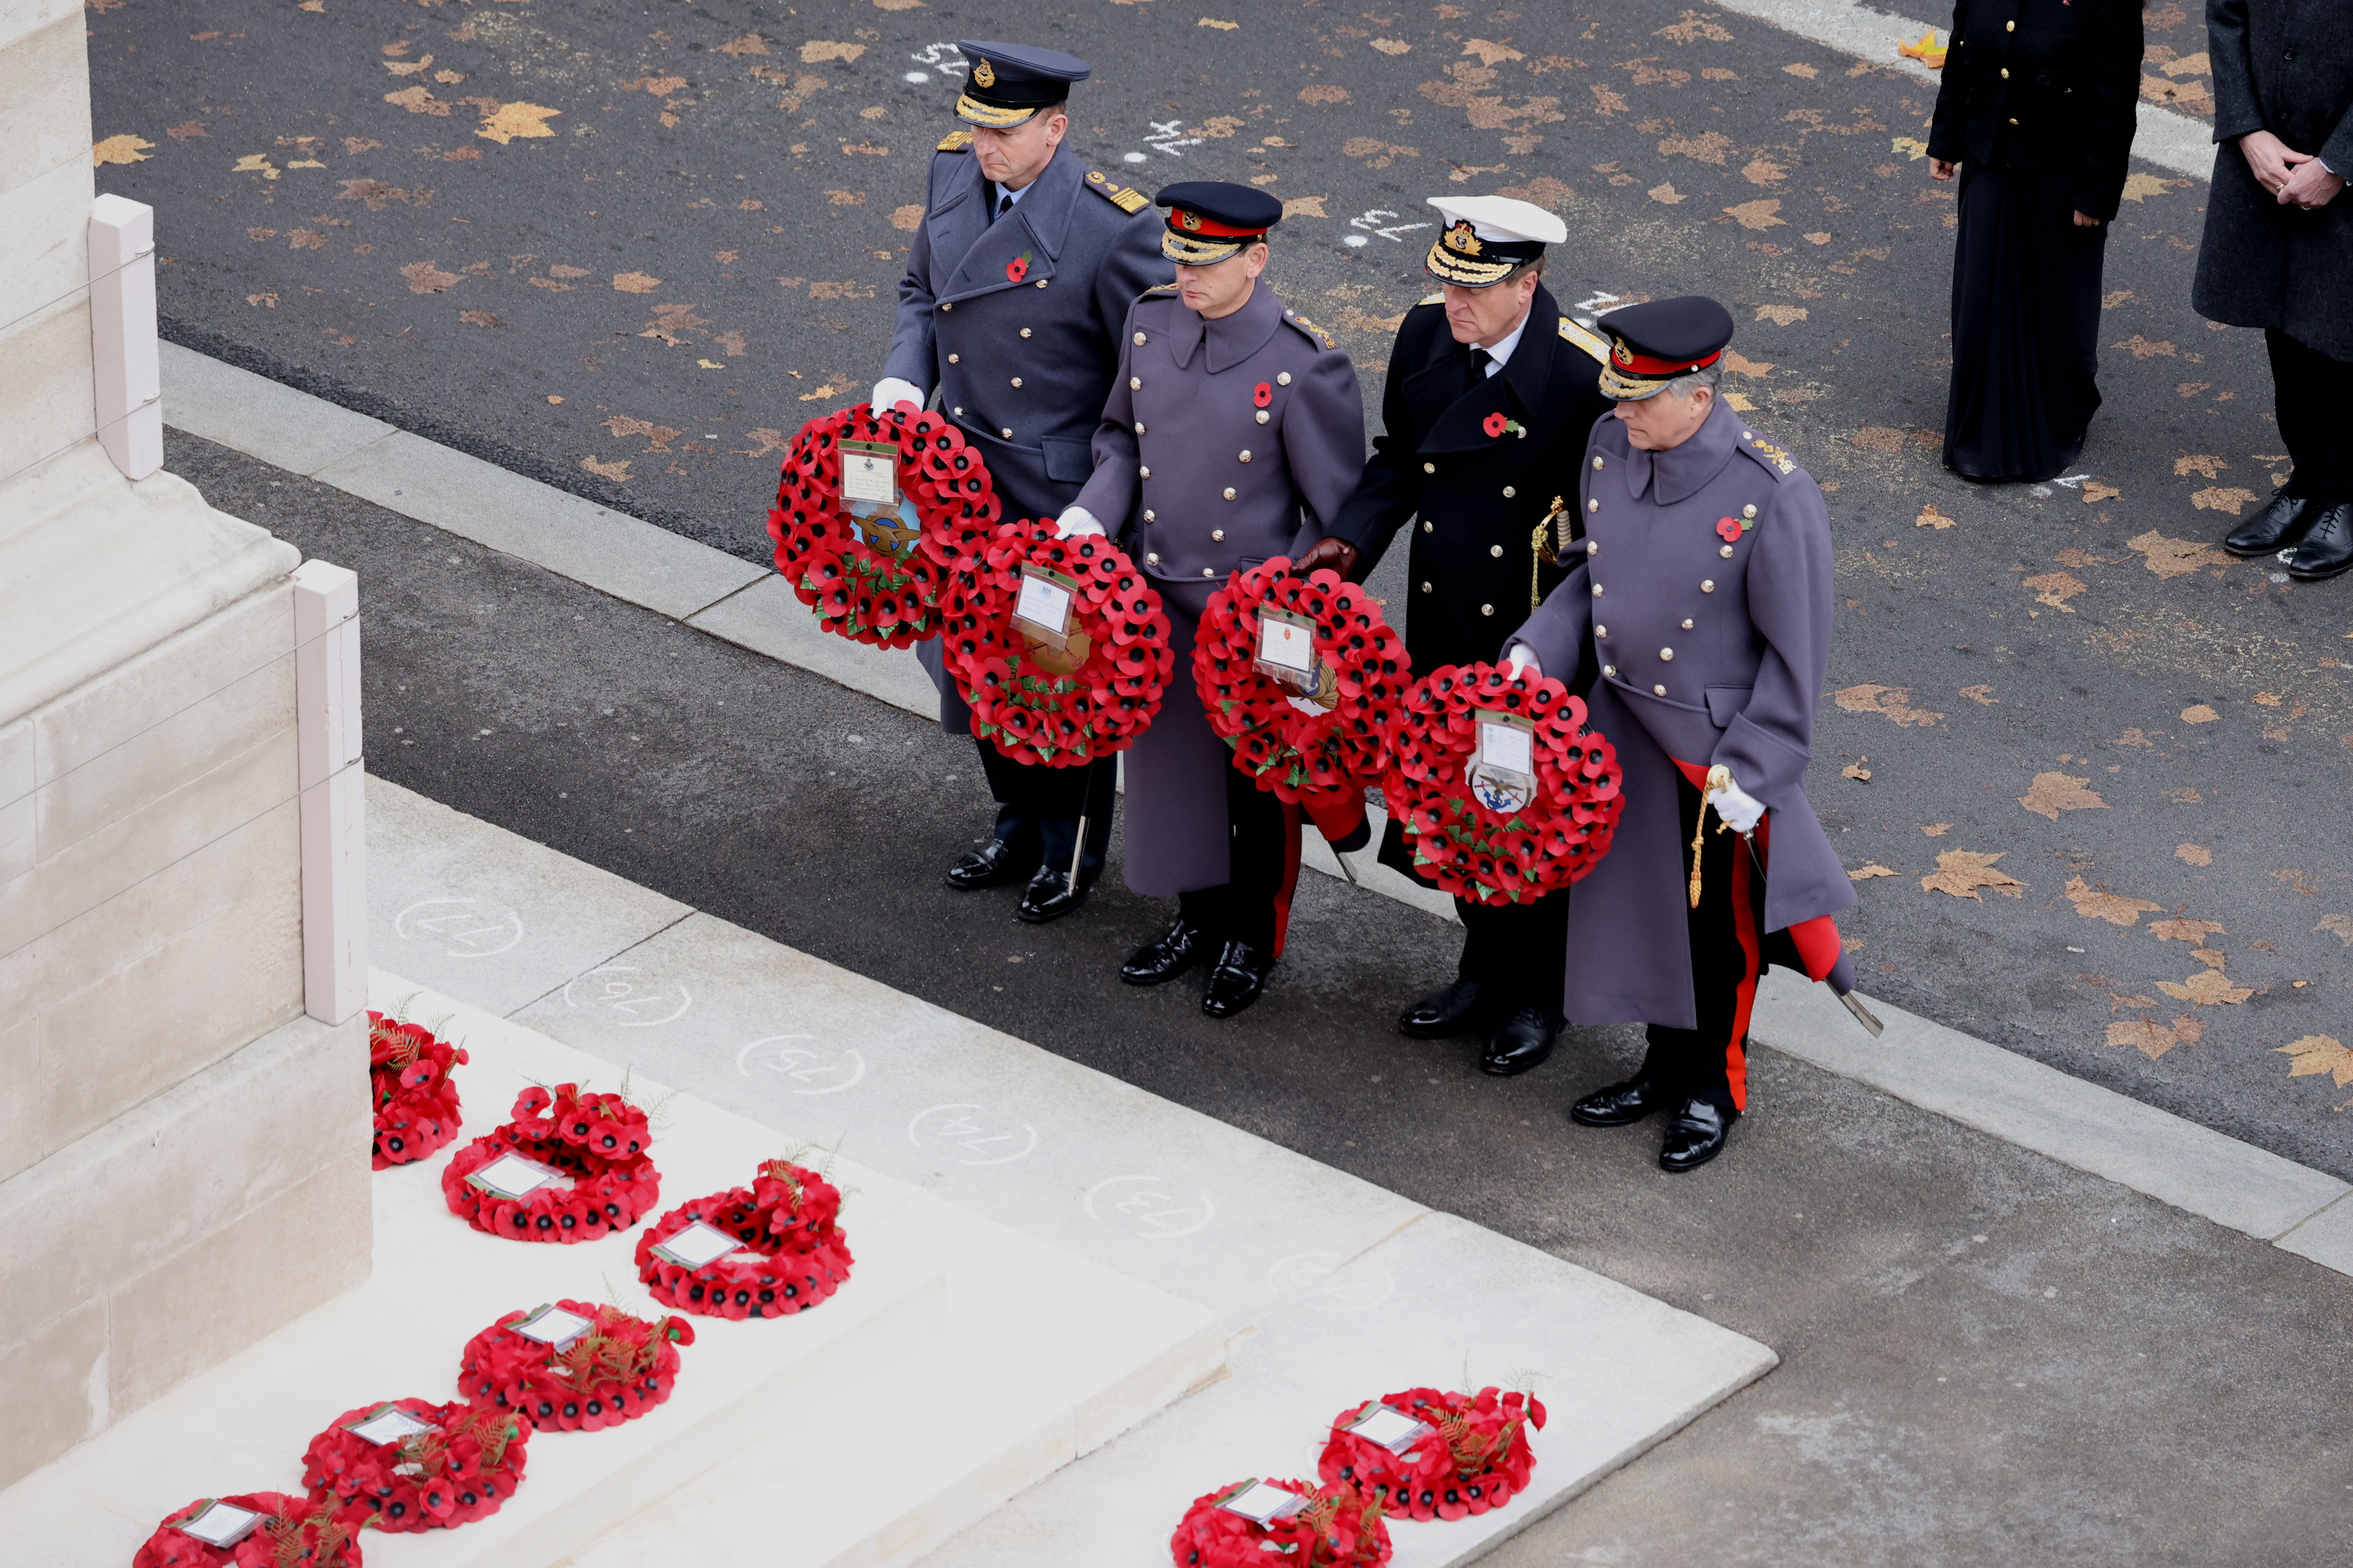 Personnel lay Poppy Wreaths at the Cenotaph.